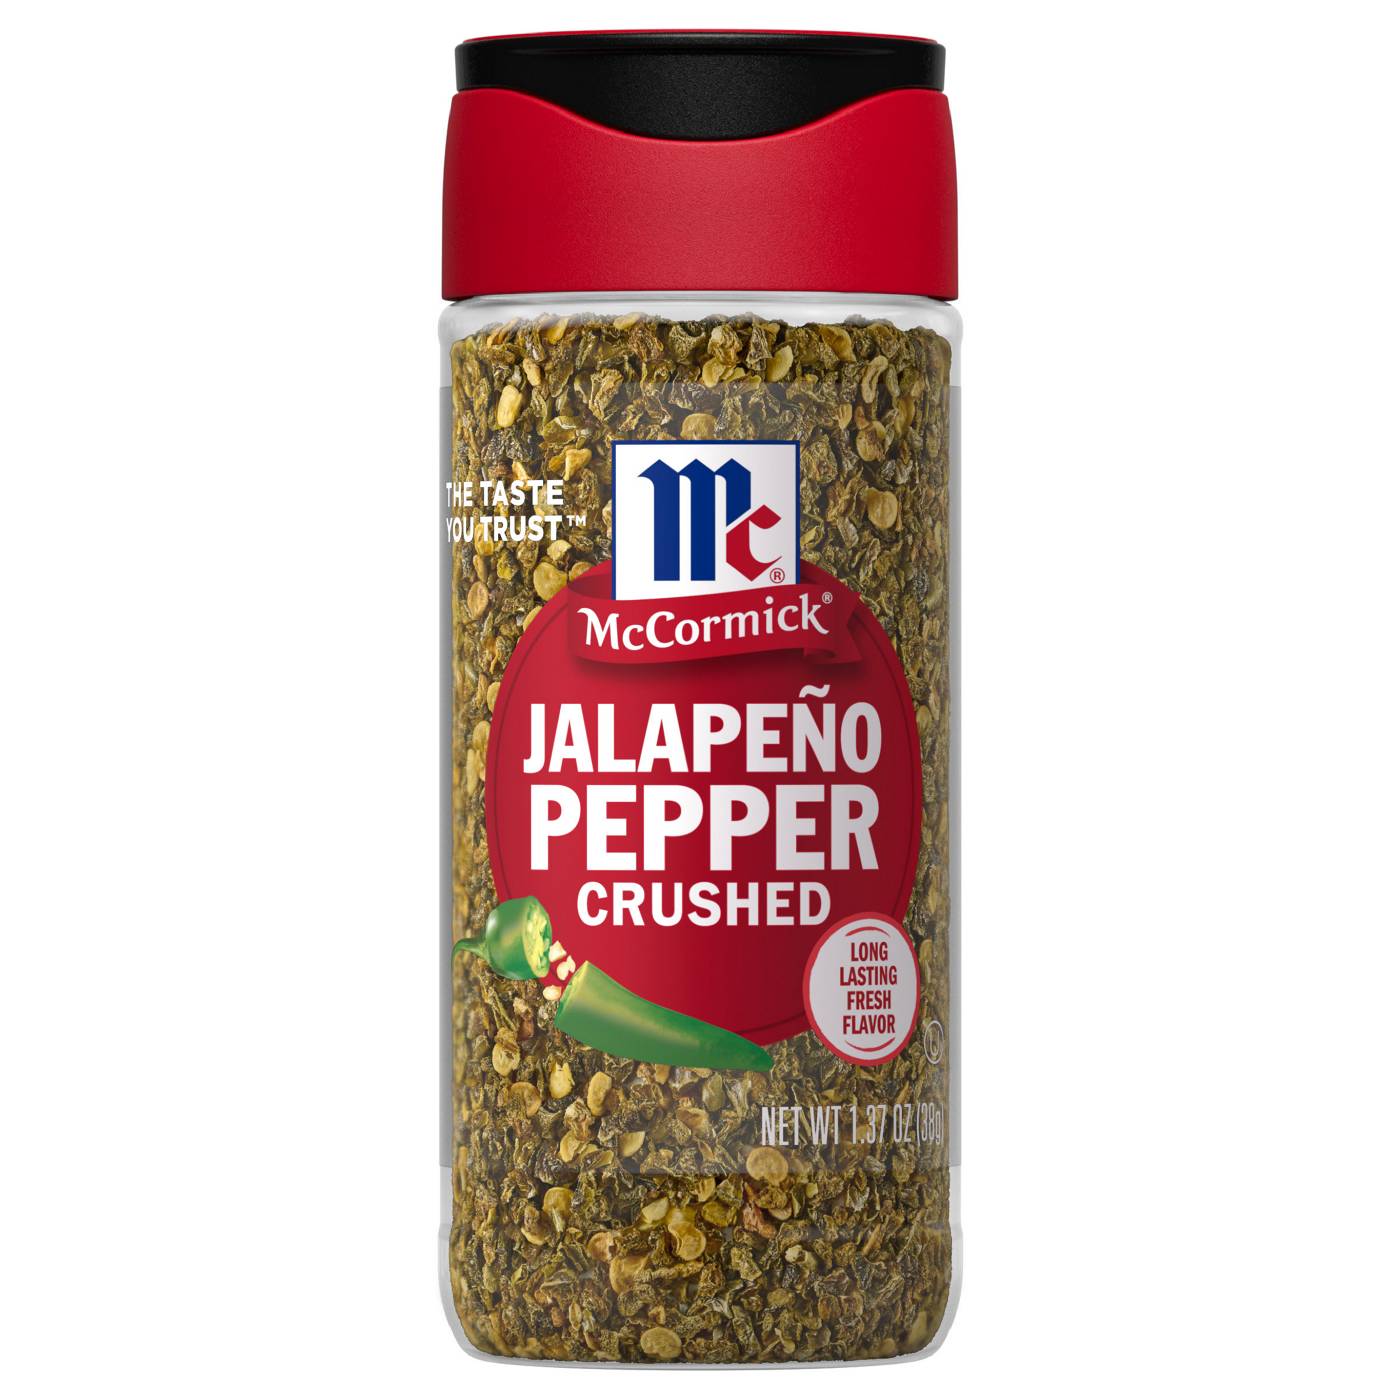 McCormick Crushed Jalapeno Pepper; image 1 of 8